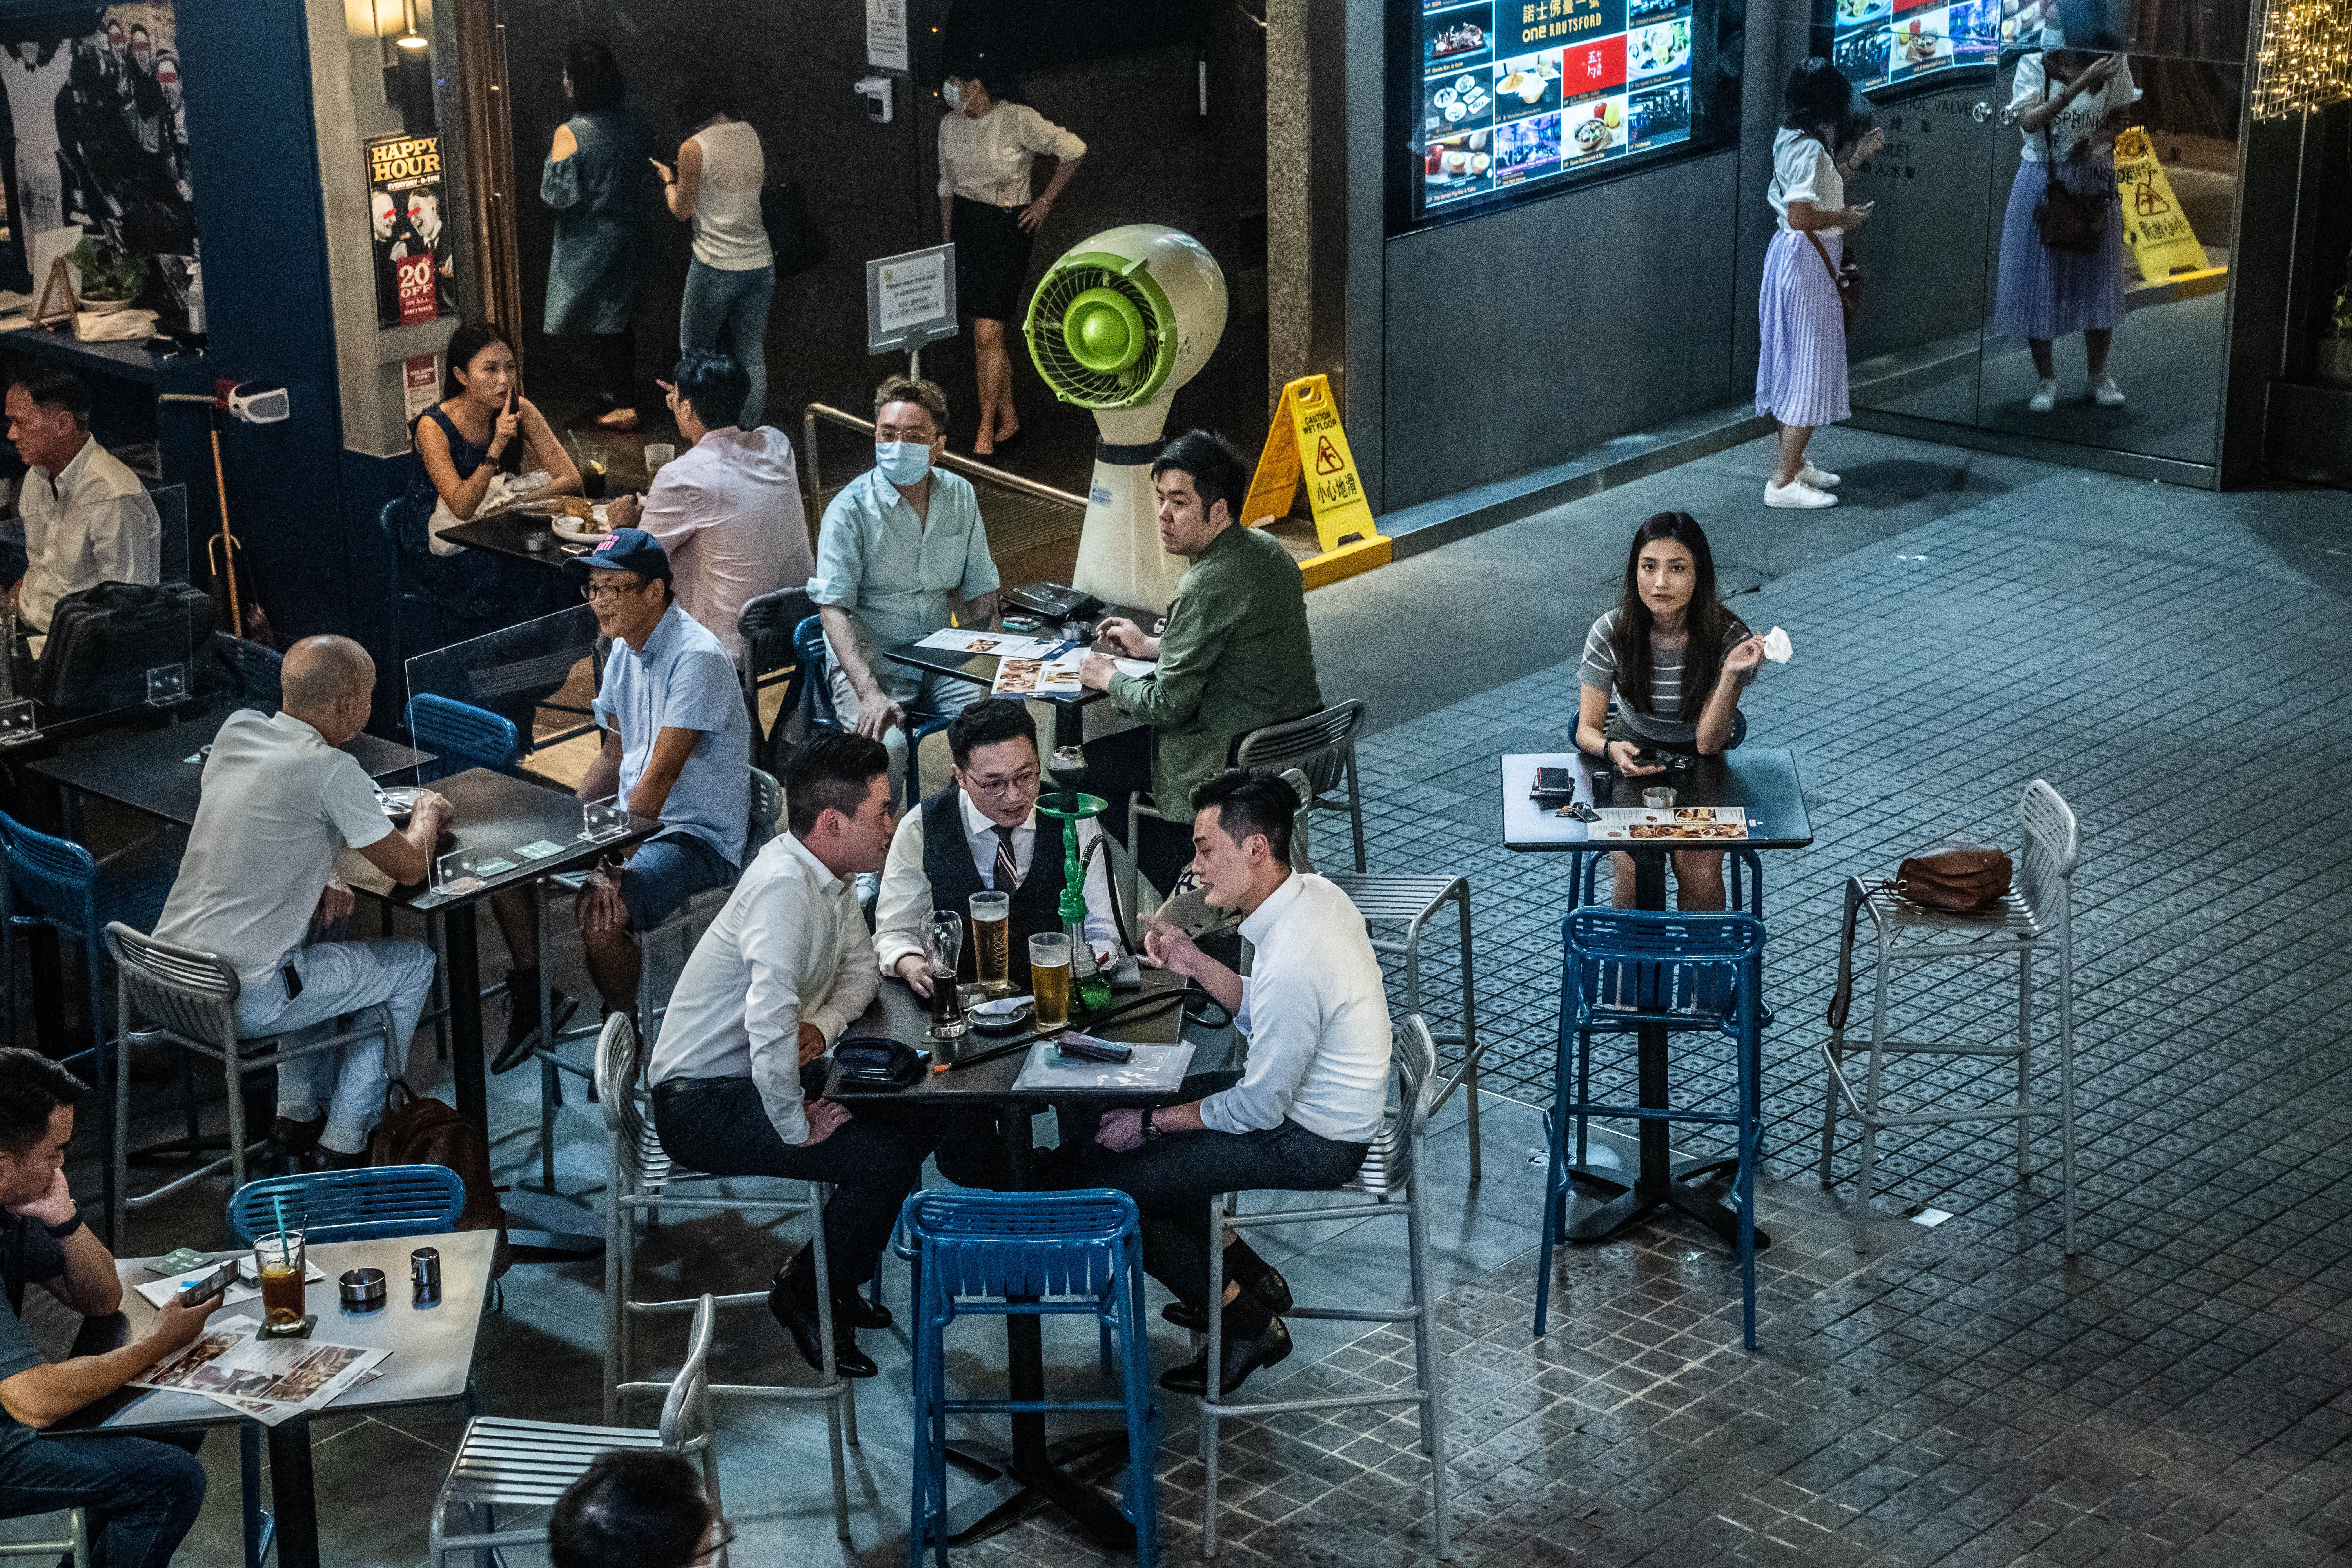 A Tsim Sha Tsui restaurant in Hong Kong, last September 11. A “vaccine bubble” would limit Hongkongers’ basic freedom to move about and participate in daily life. Photo: Bloomberg